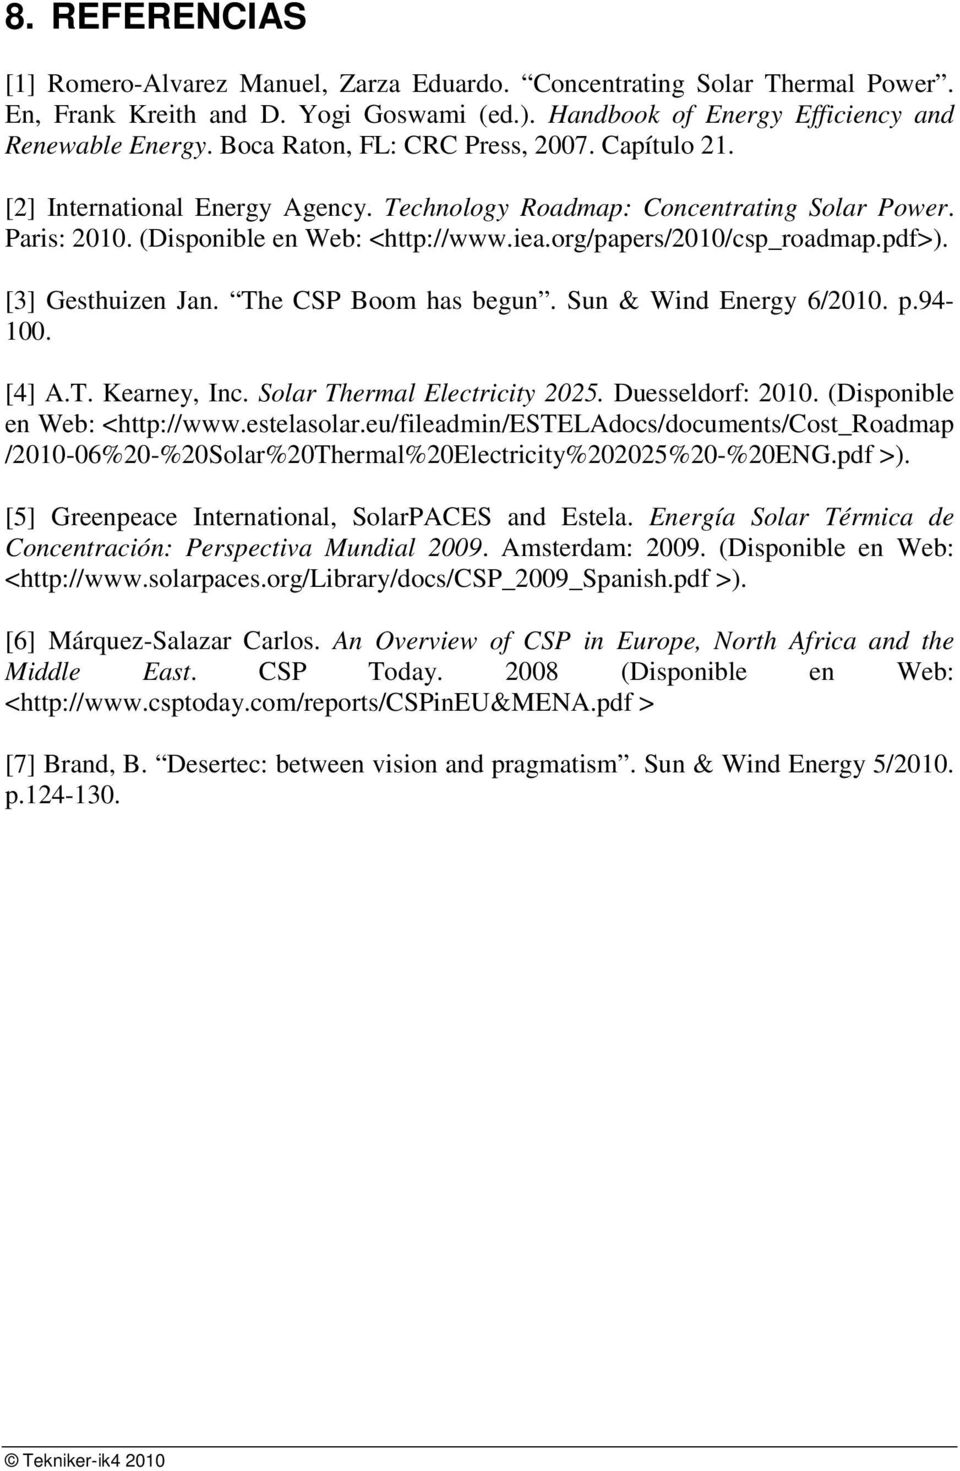 org/papers/2010/csp_roadmap.pdf>). [3] Gesthuizen Jan. The CSP Boom has begun. Sun & Wind Energy 6/2010. p.94-100. [4] A.T. Kearney, Inc. Solar Thermal Electricity 2025. Duesseldorf: 2010.